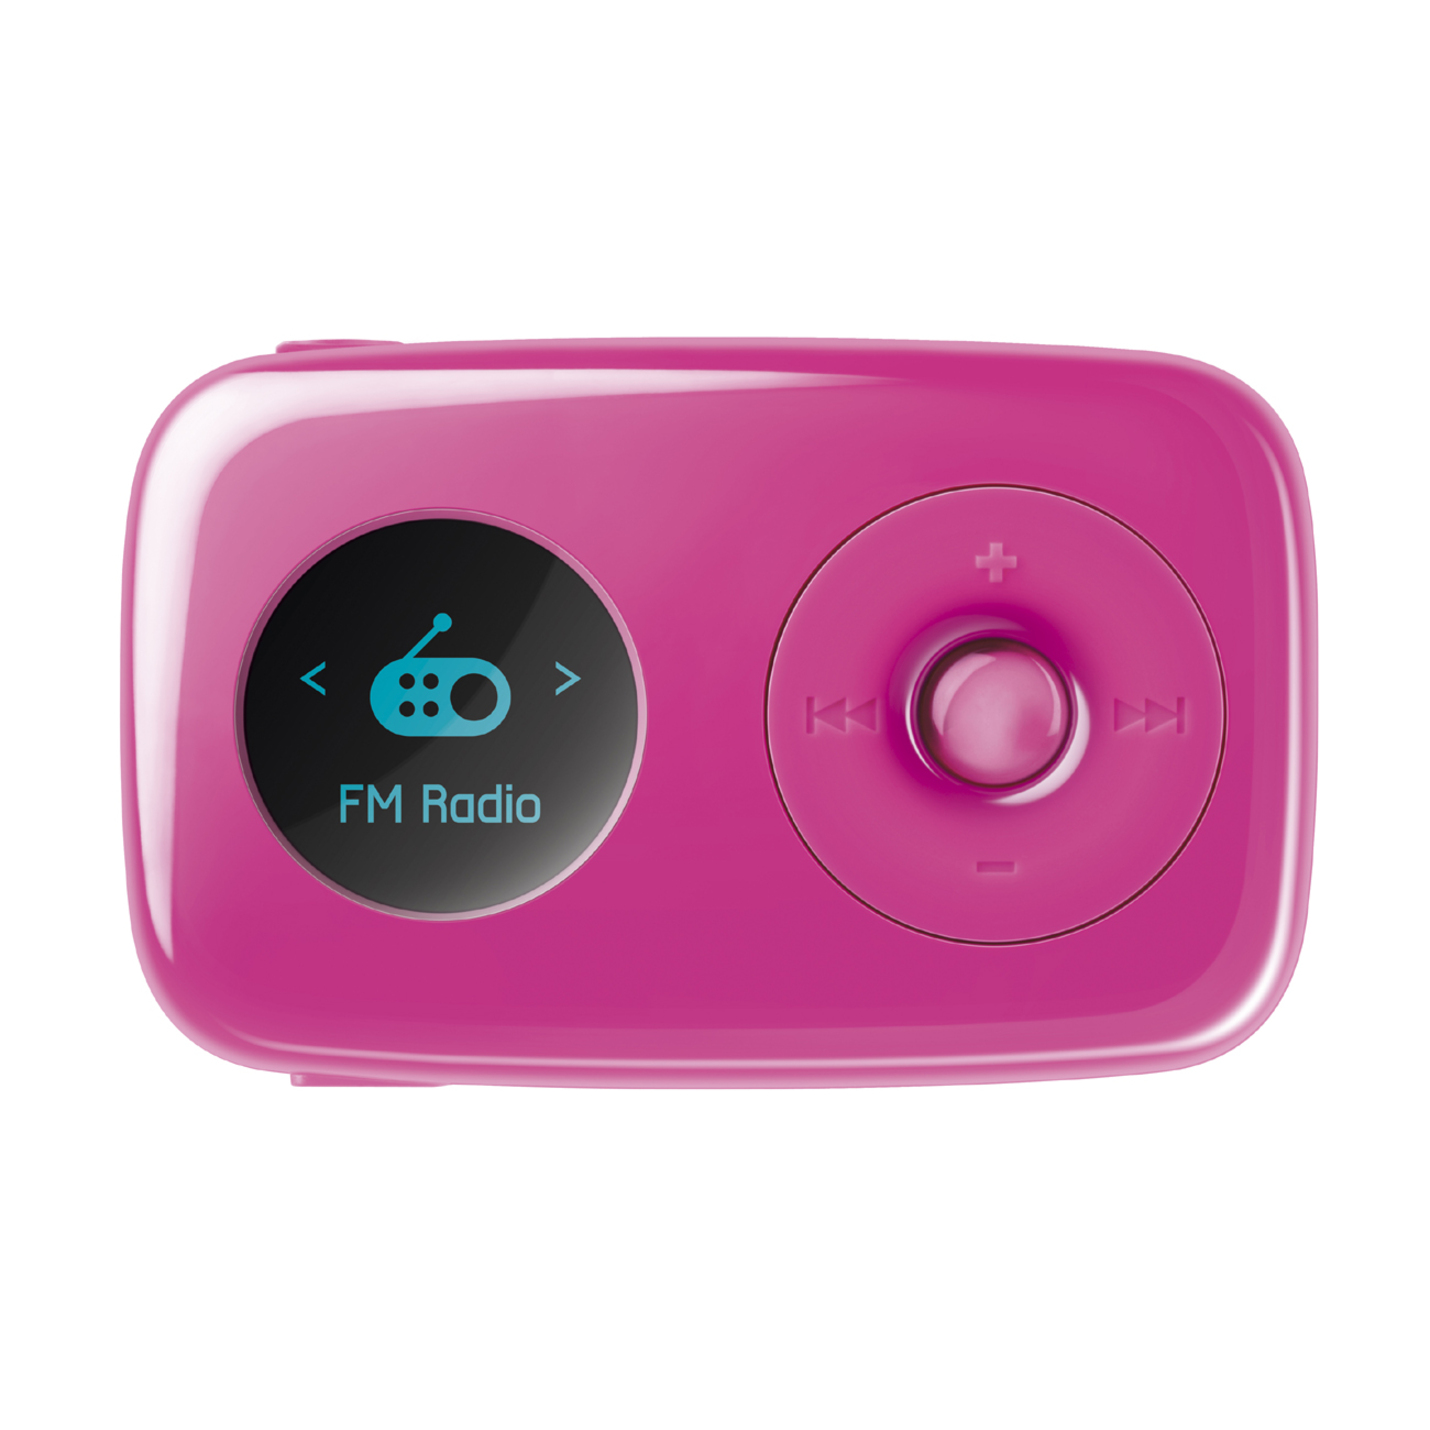 Creative Zen Stone Plus 2GB MP3 Player with Voice Recorder, Pink - image 1 of 3